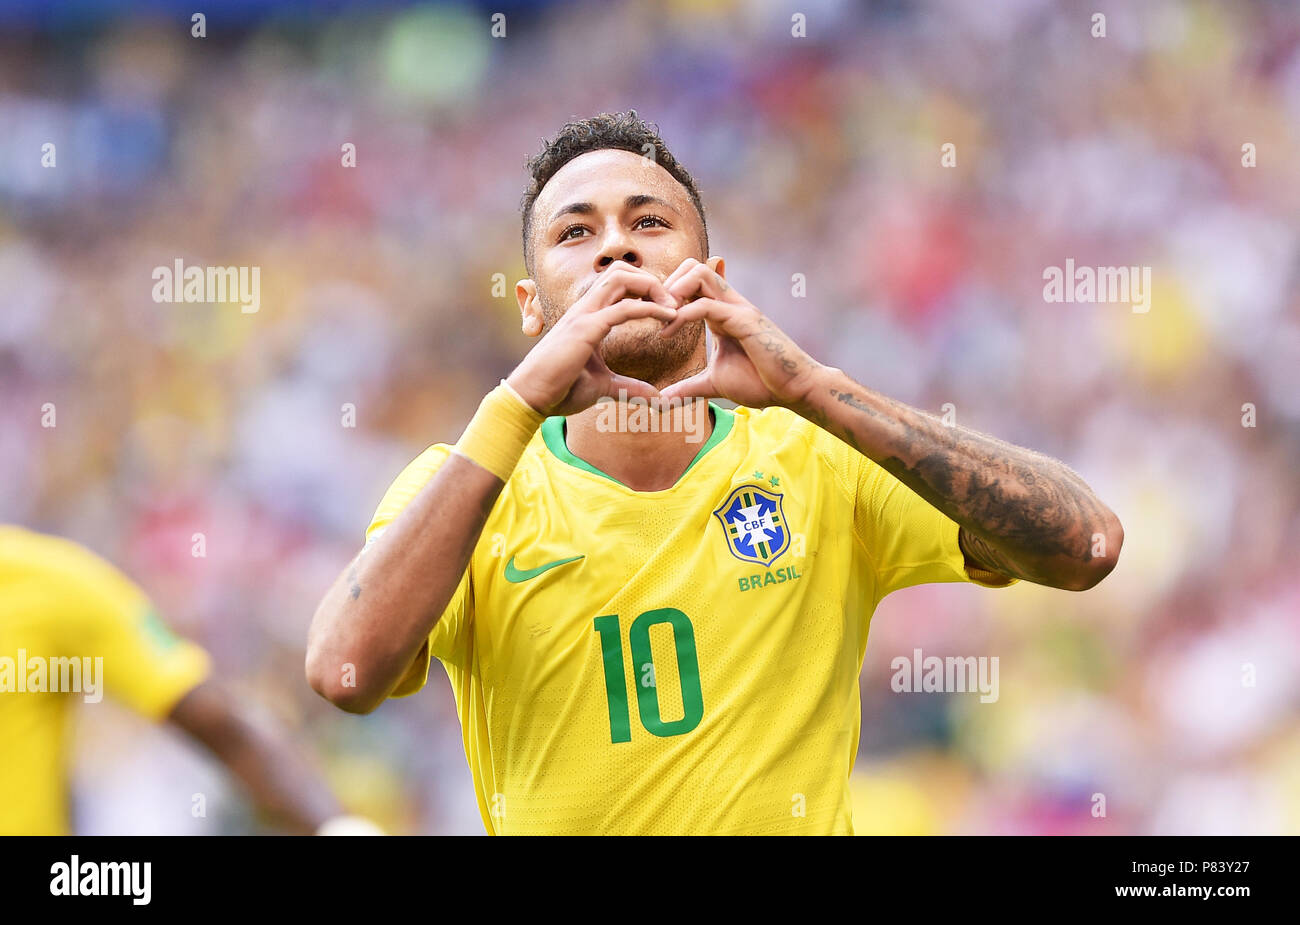 SAMARA, RUSSIA - JULY 02: Neymar of Brazil celebrates scoring a goal during the 2018 FIFA World Cup Russia Round of 16 match between Brazil and Mexico at Samara Arena on July 2, 2018 in Samara, Russia. (Photo by Lukasz Laskowski/PressFocus/MB Media) Stock Photo